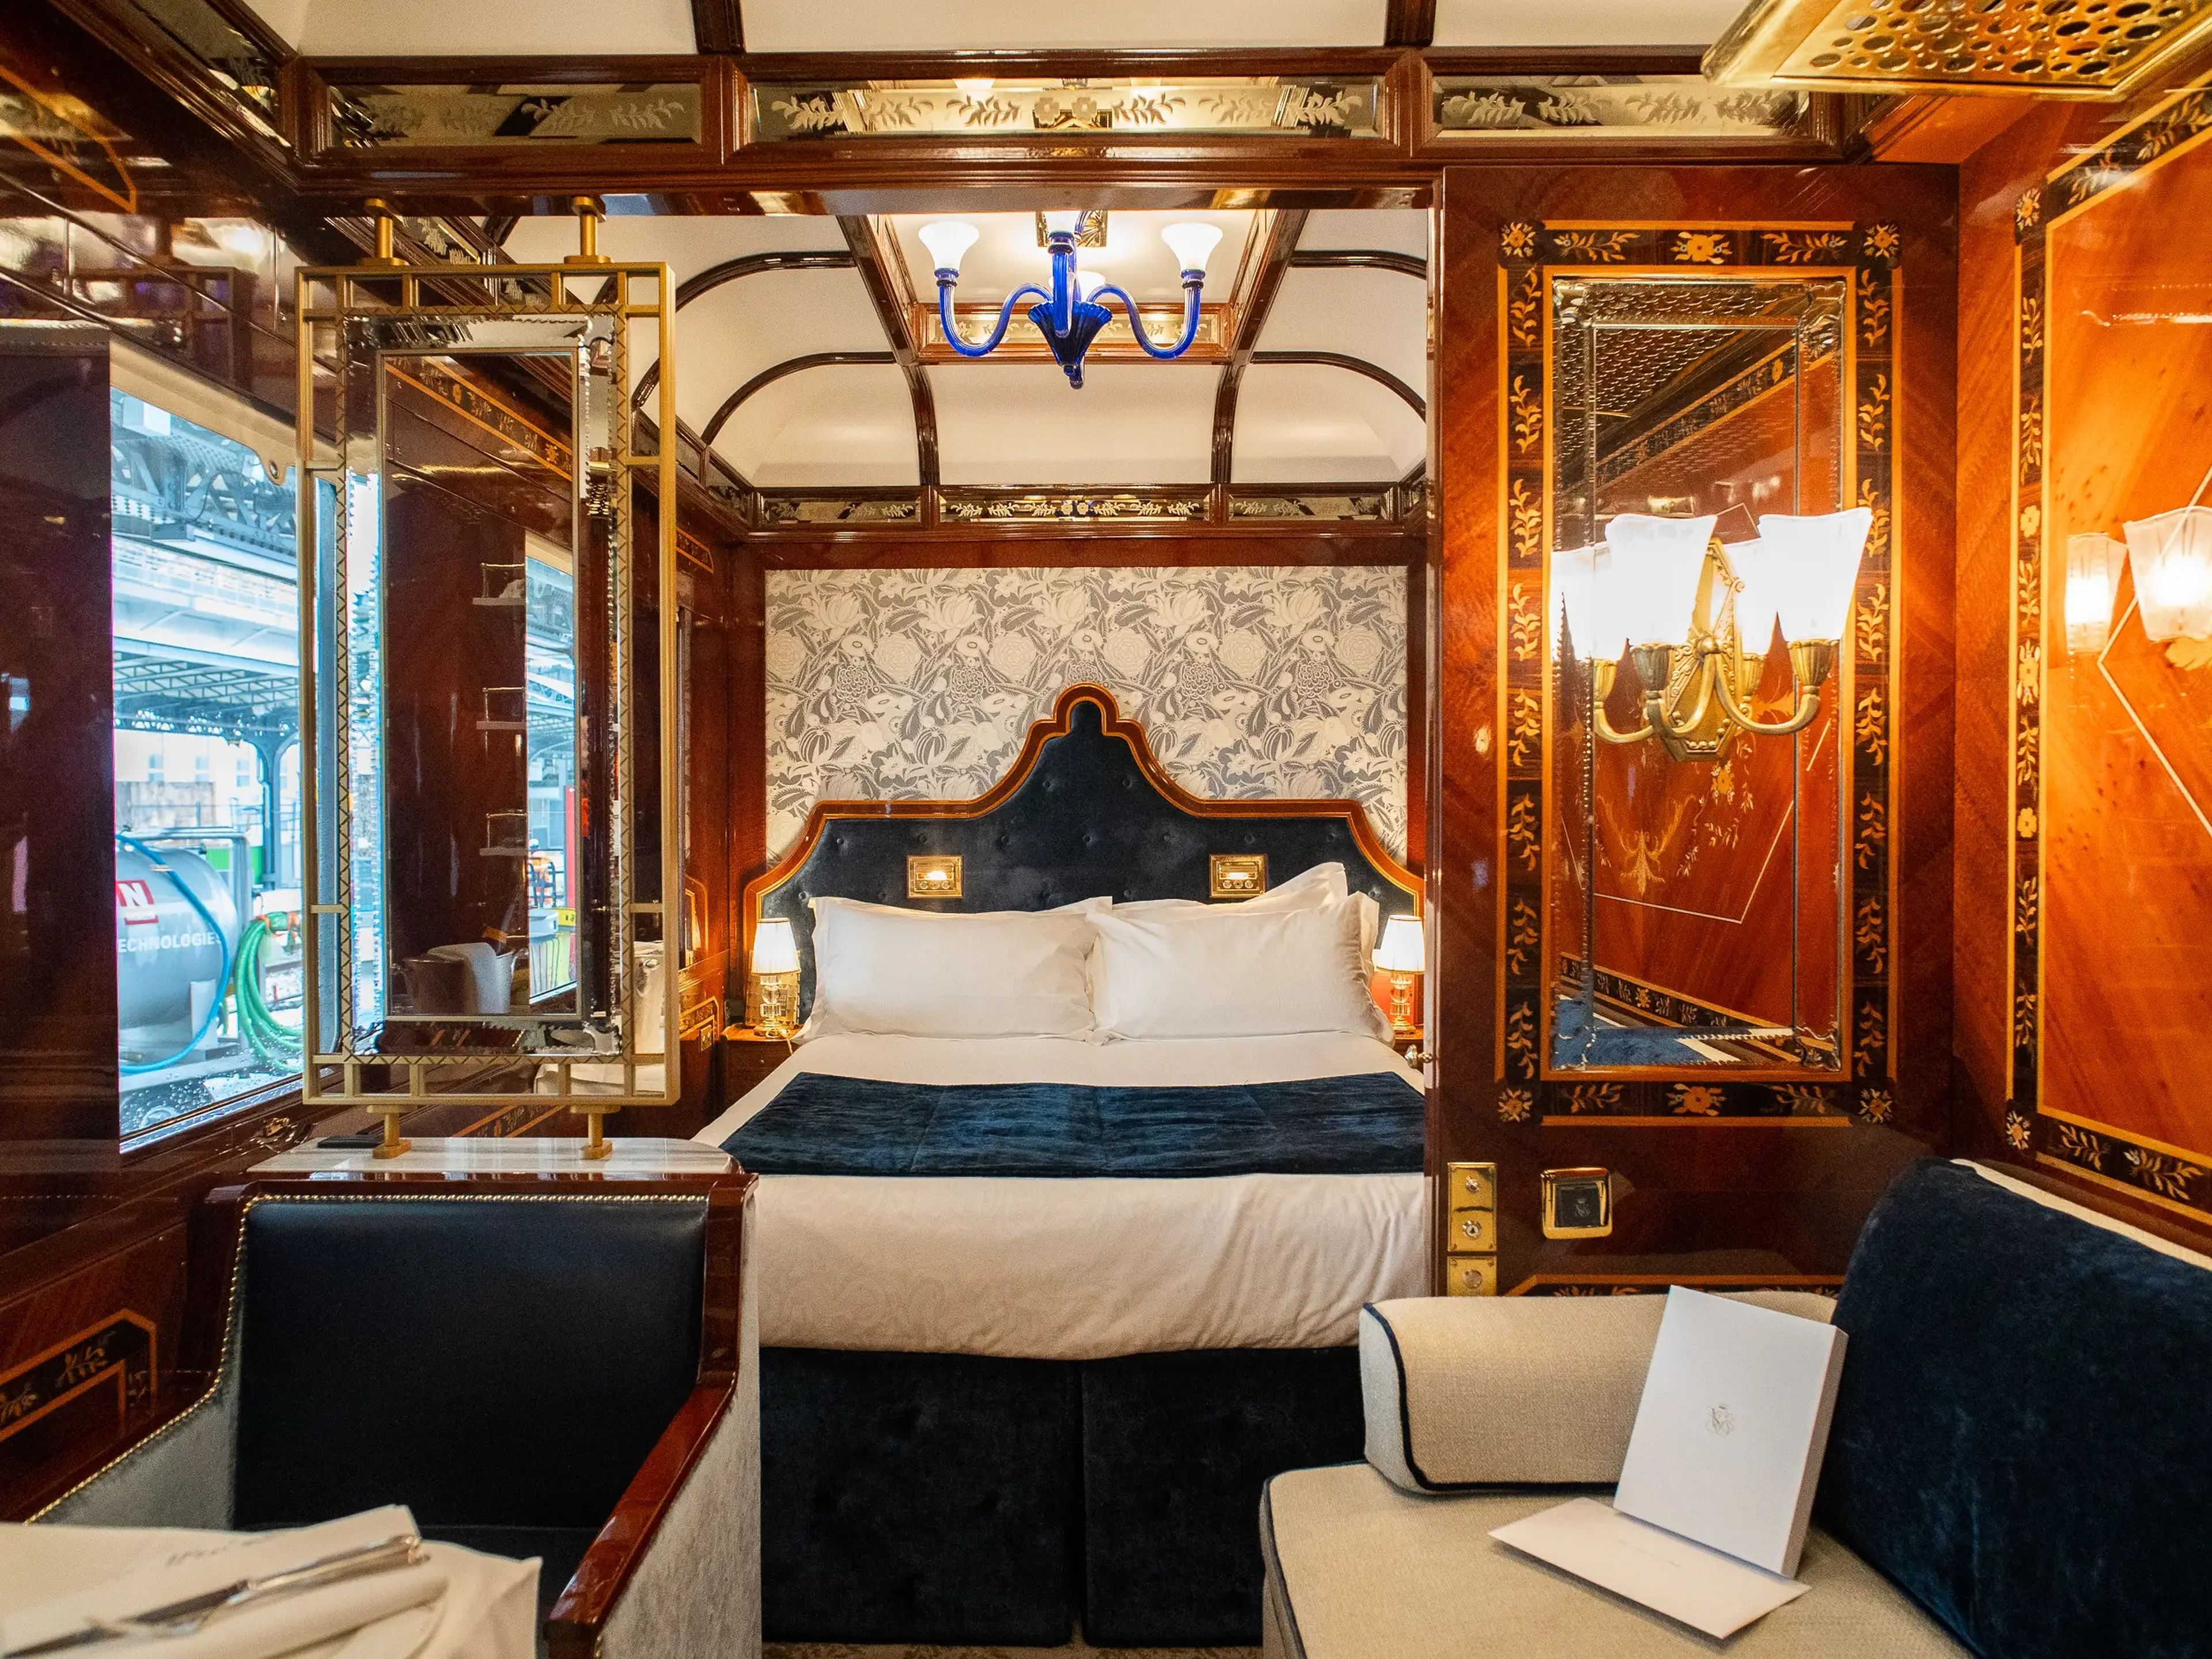 Inside a wood-walled train suite with white and navy blue furnishings, including a seat on the left, a couch on the right, and a bed in the back center.